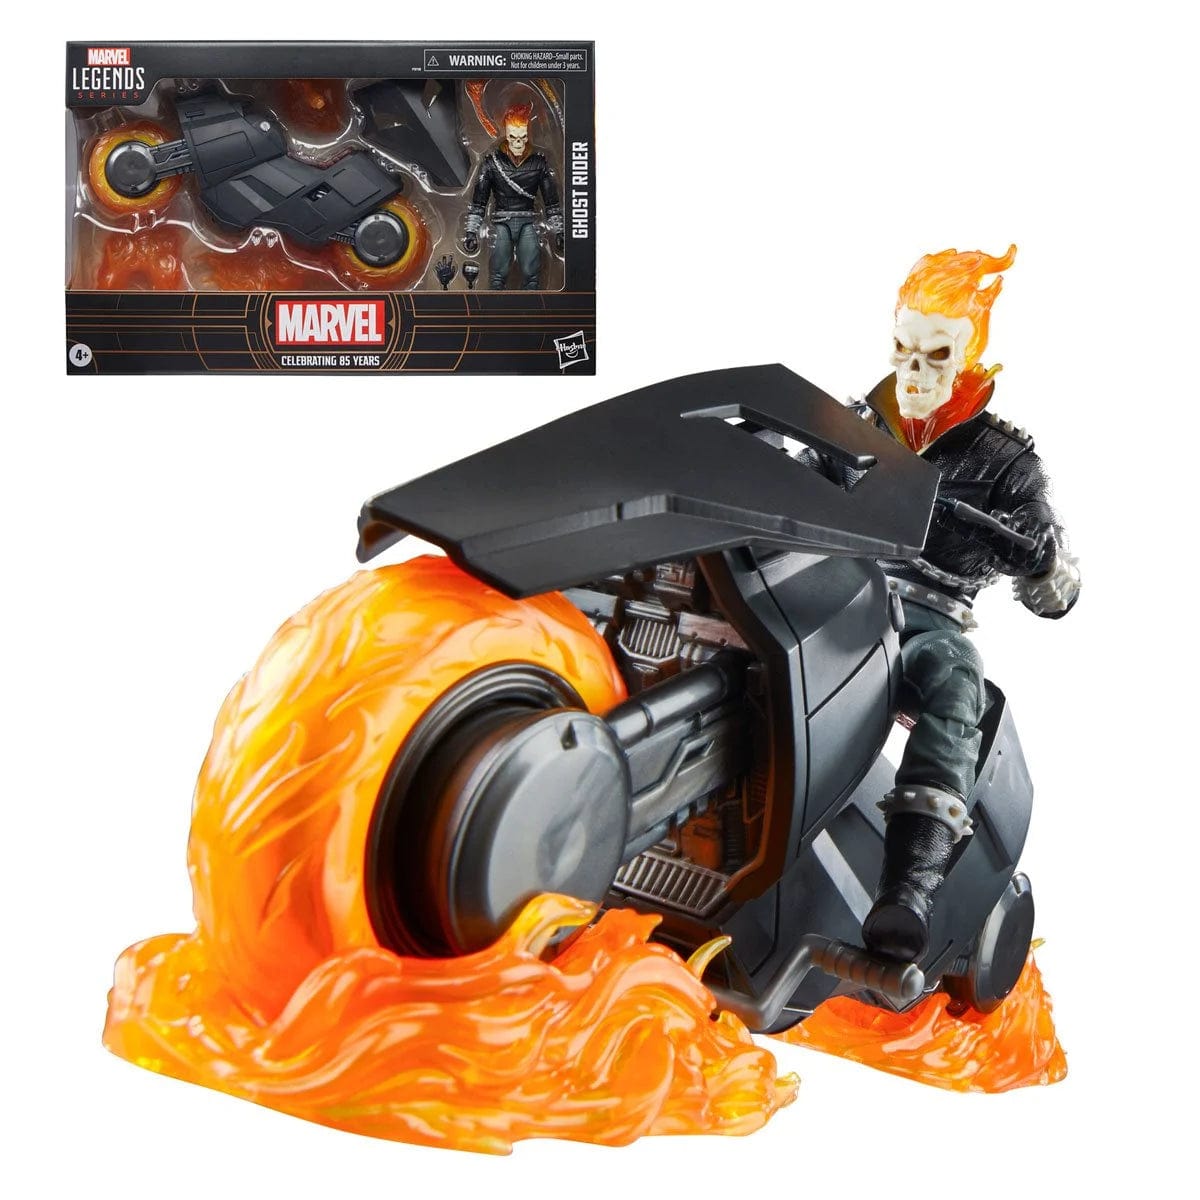 Marvel-Legends-Series-Ghost-Rider-_Danny-Ketch_-with-Motorcycle-Action-Figure